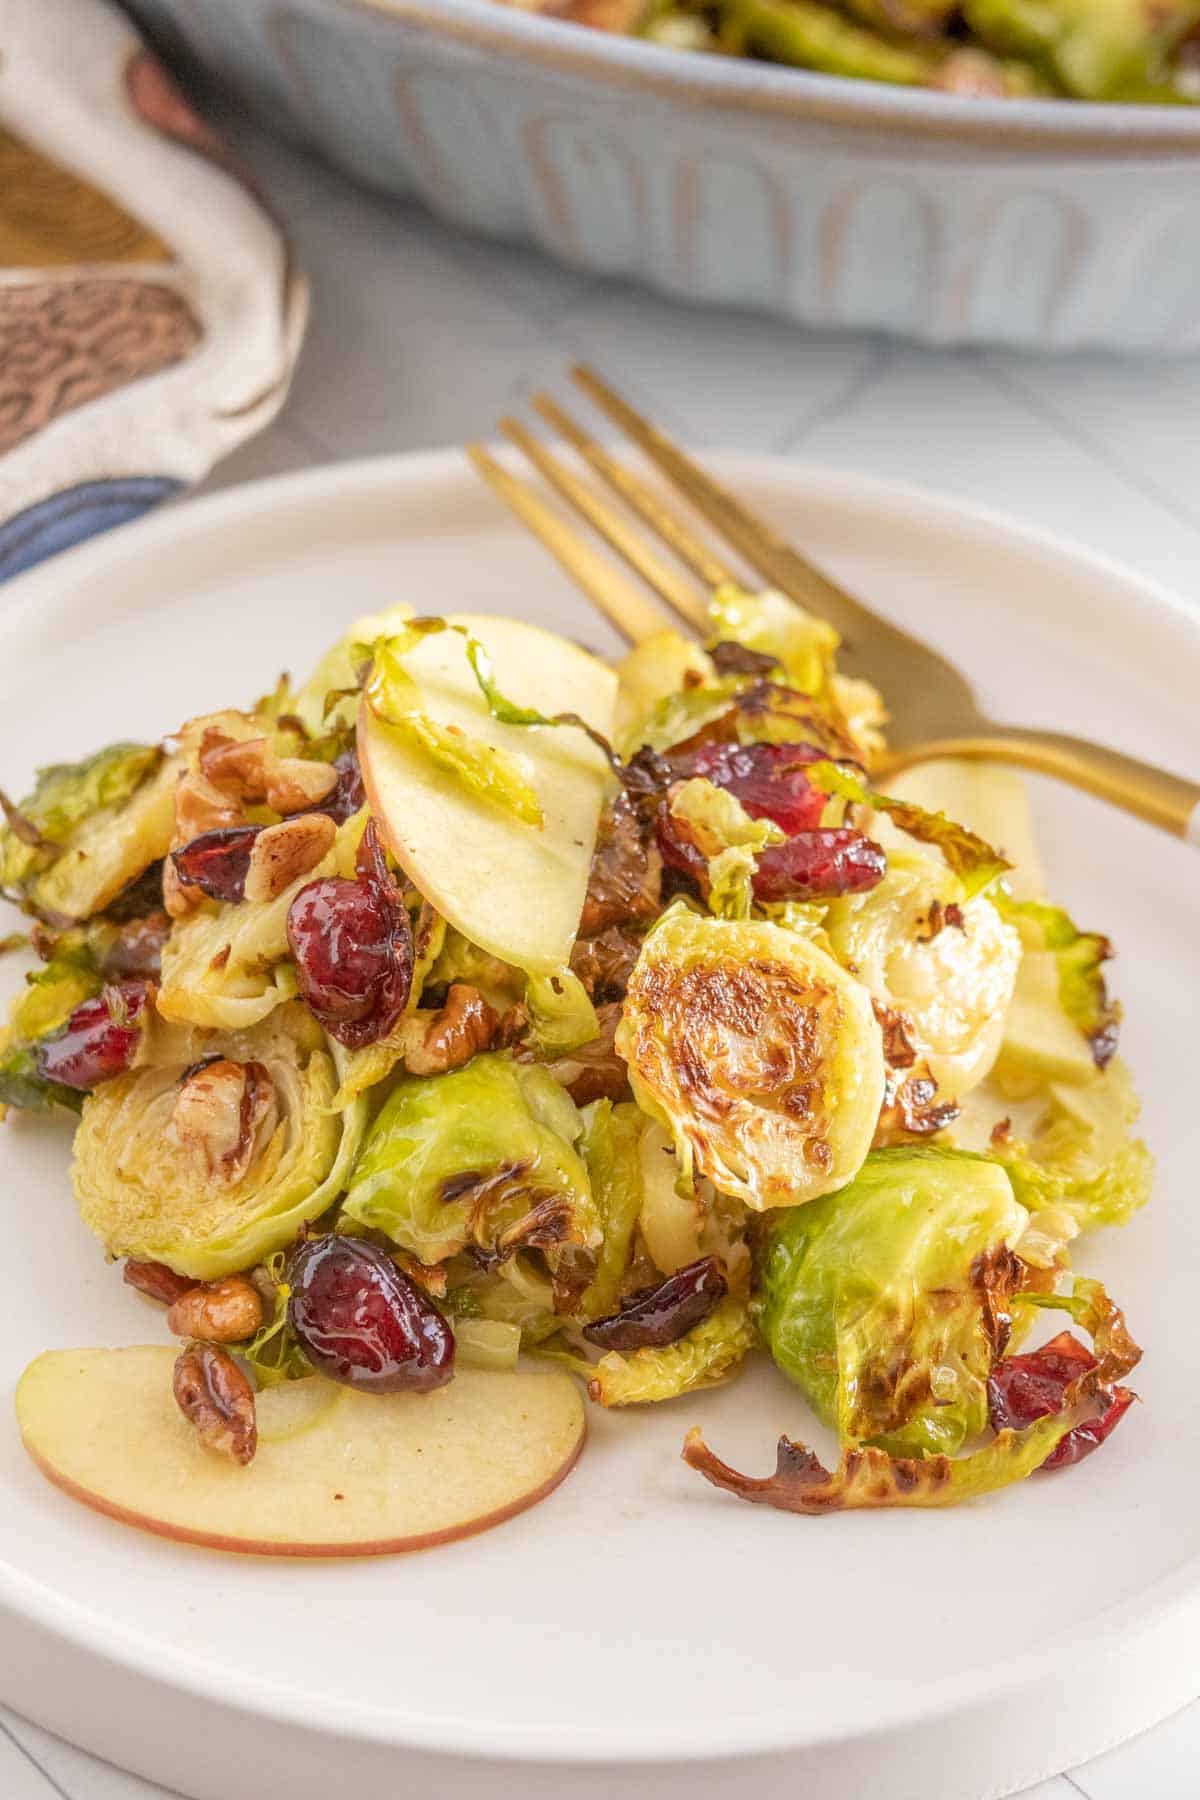 Brussels sprouts with apples and cranberries on a plate.